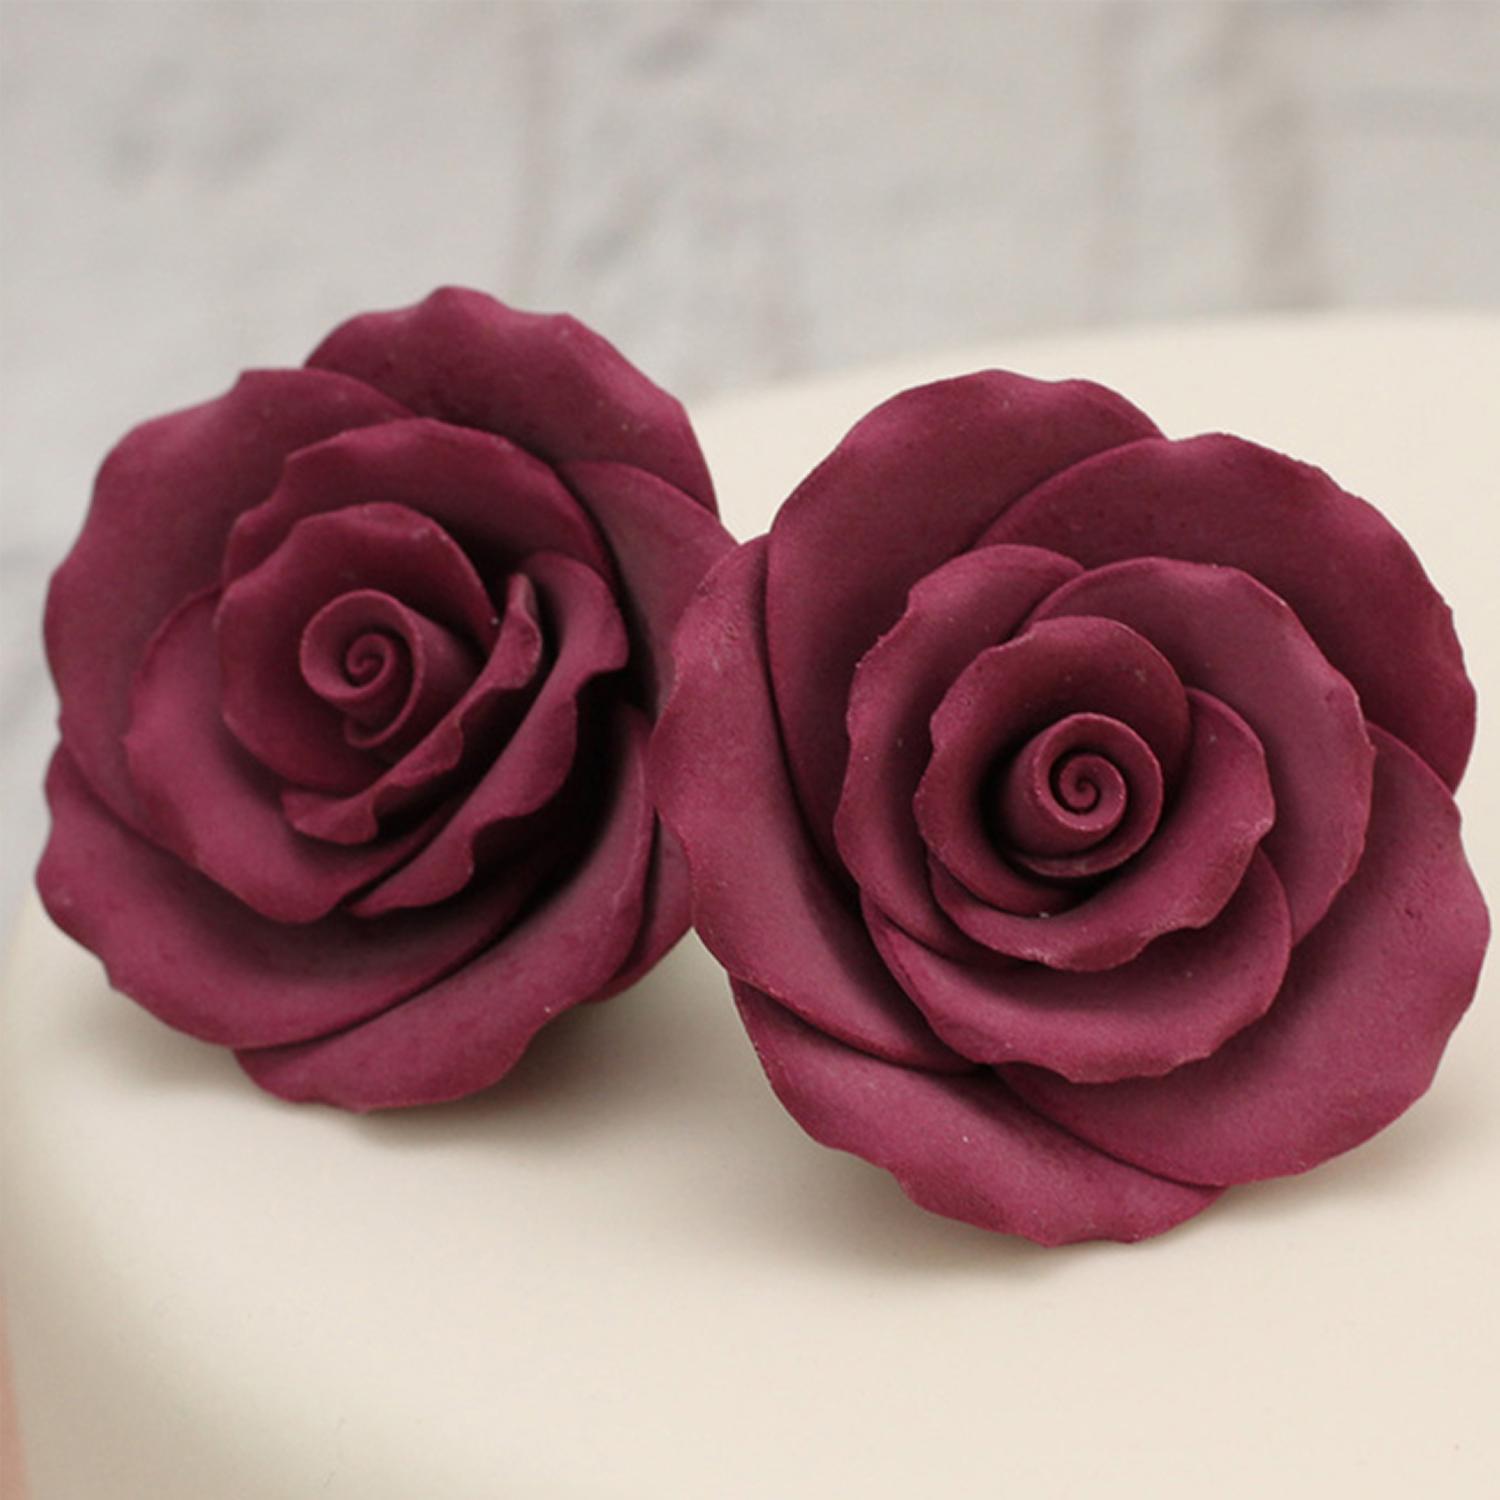 SUPER CAKES SMALL ROSE FLOWERS MAROON